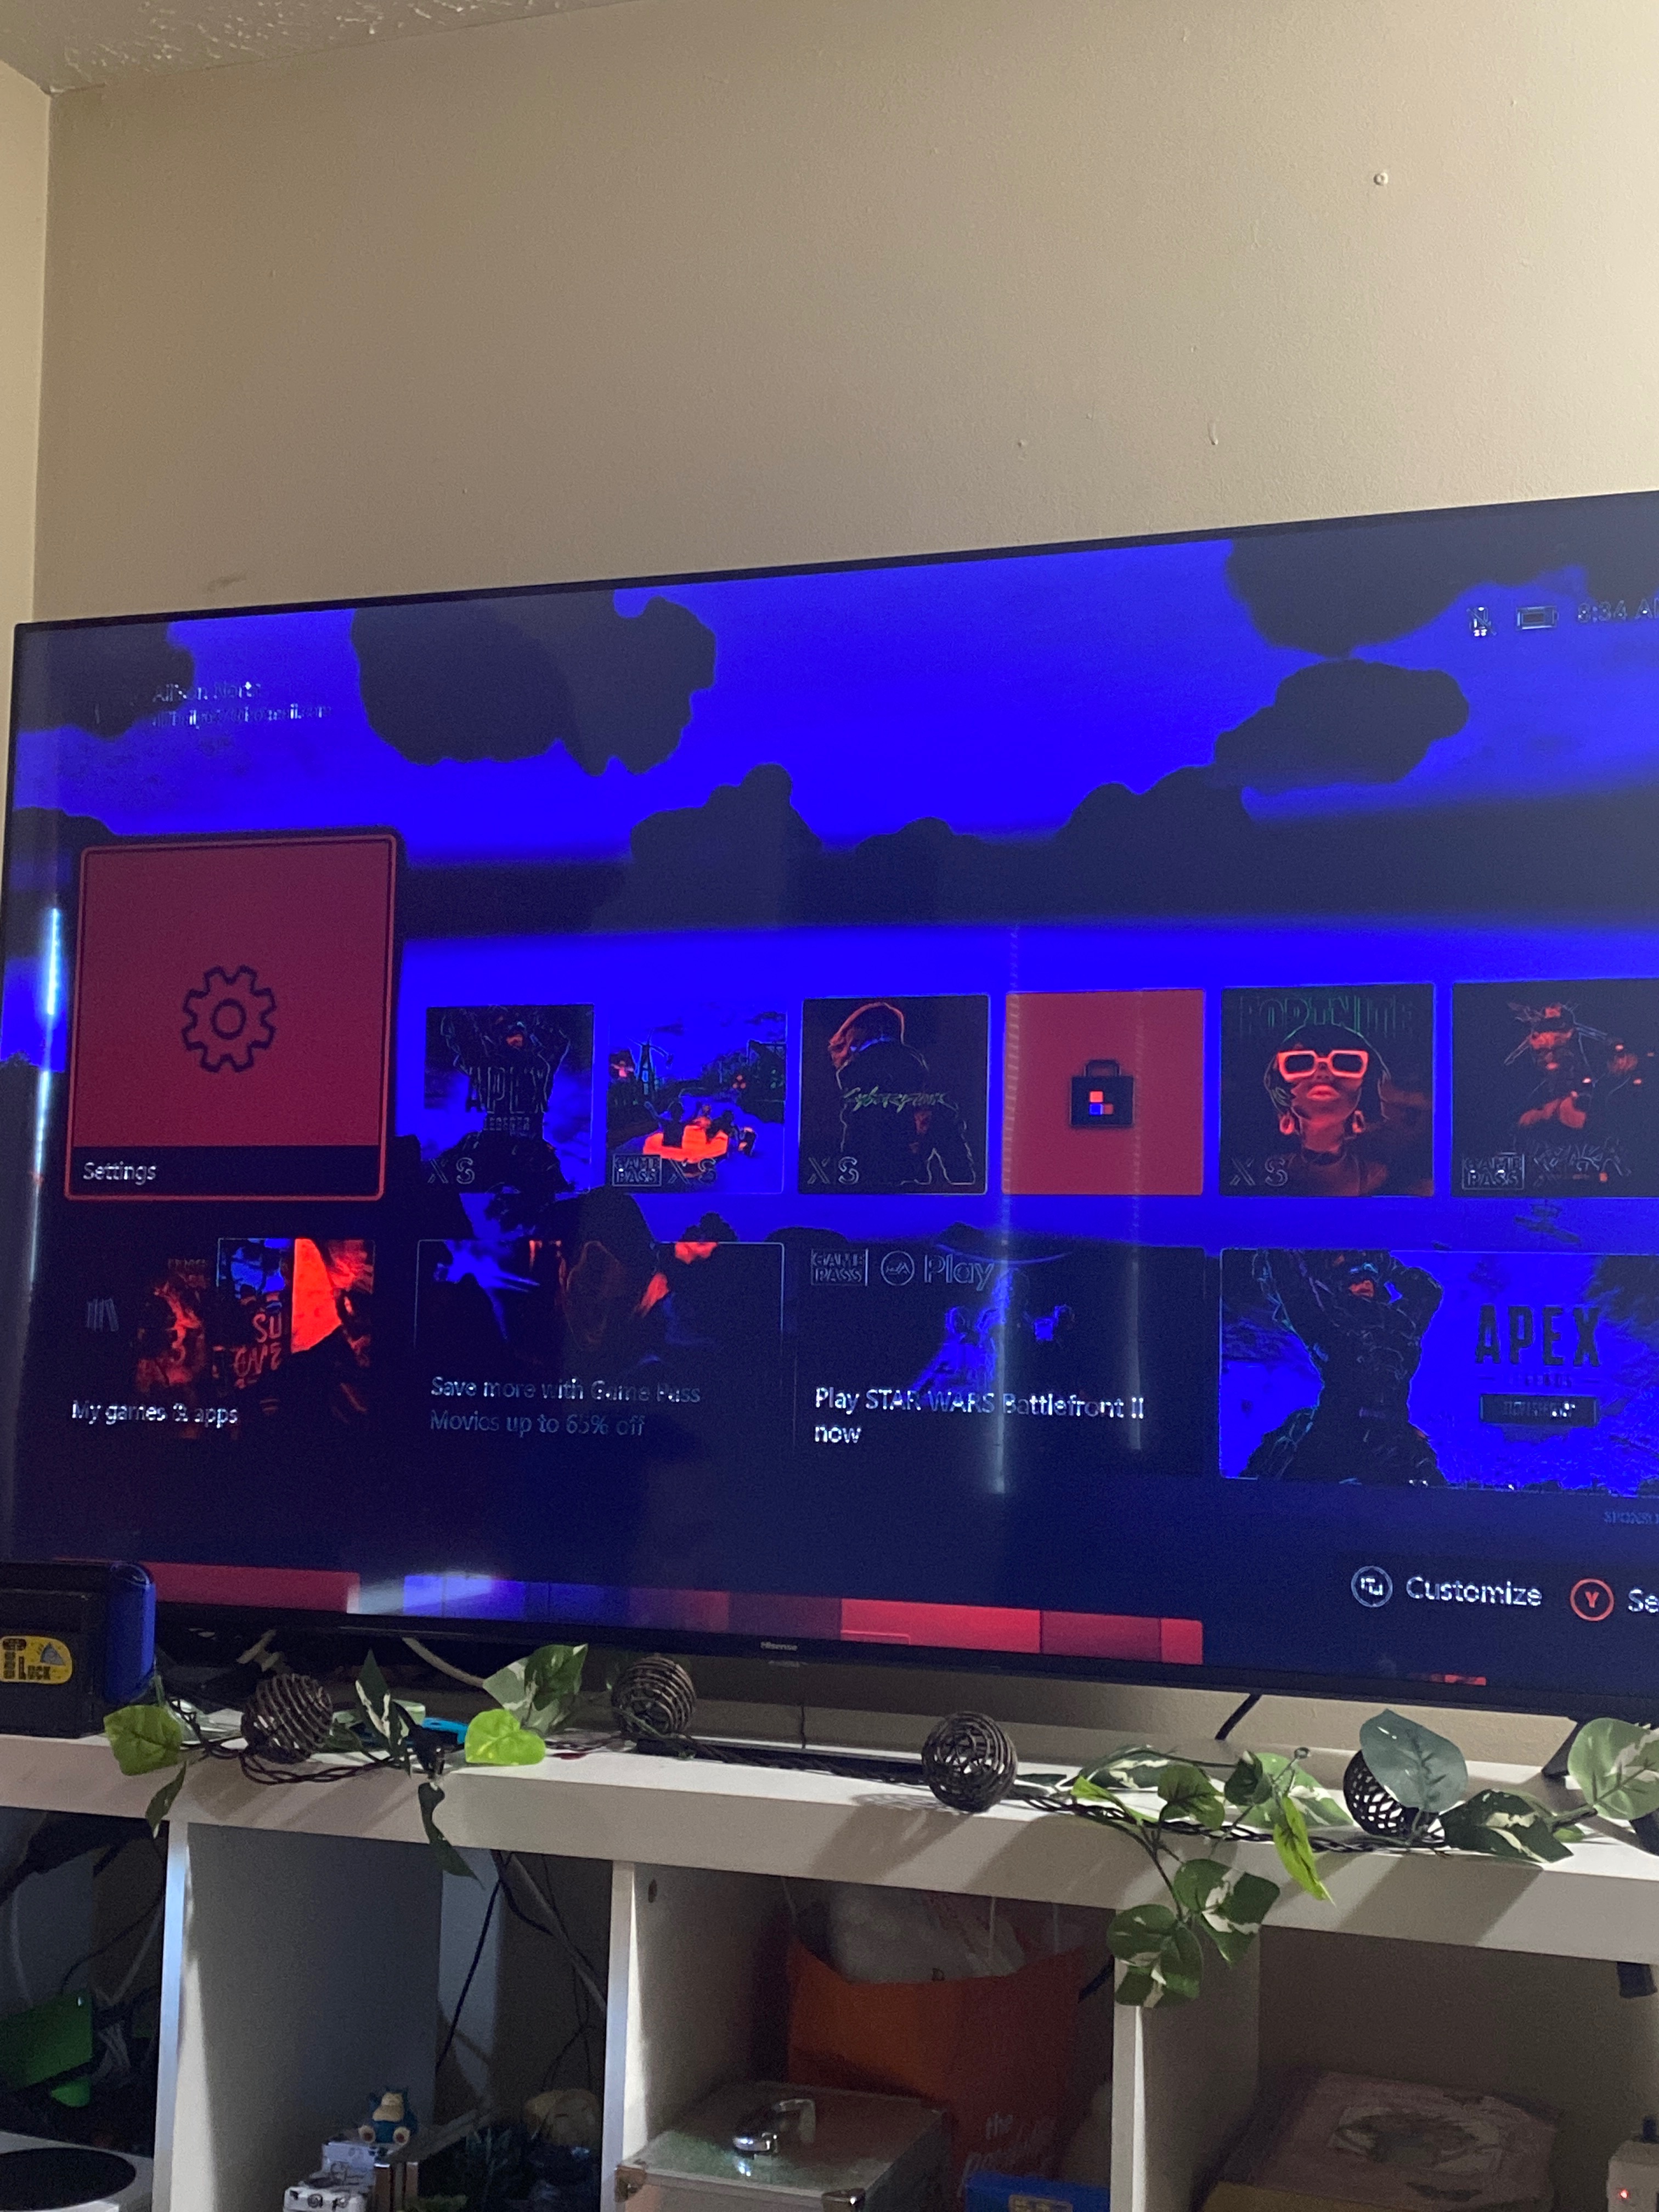 Your Xbox home screen is about to look much different